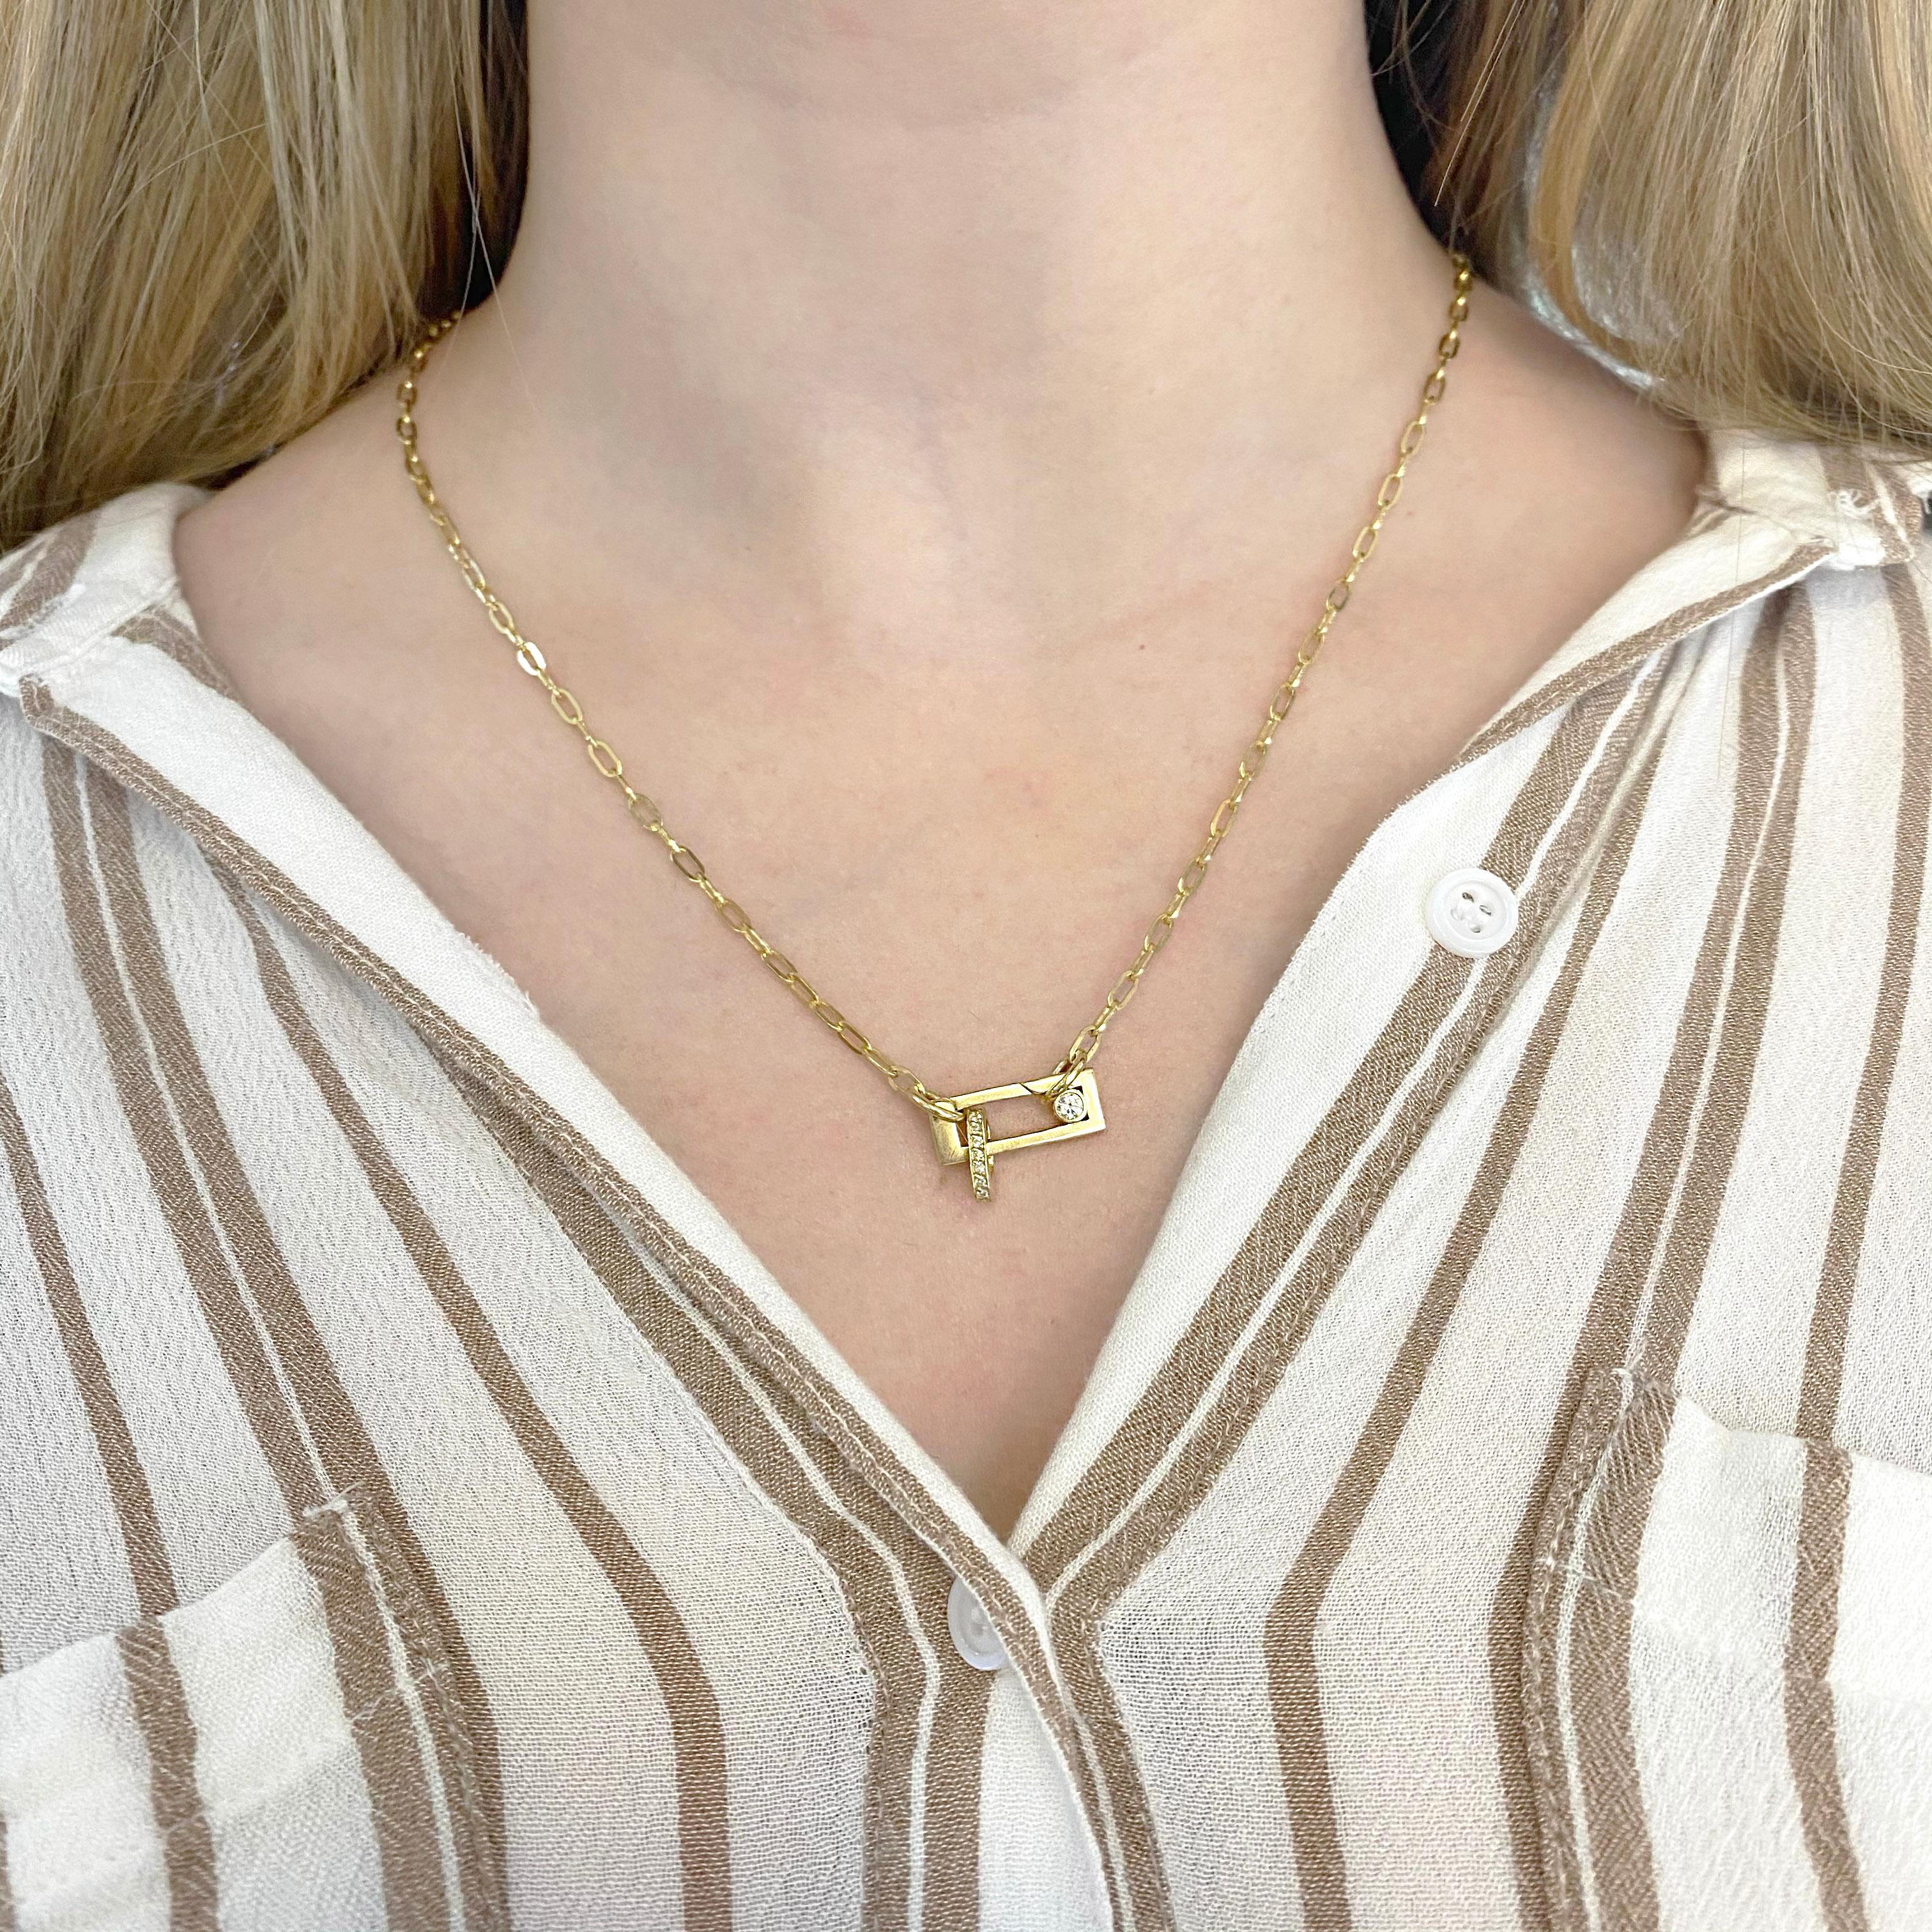 14kt yellow gold paperclip necklace with heart charm